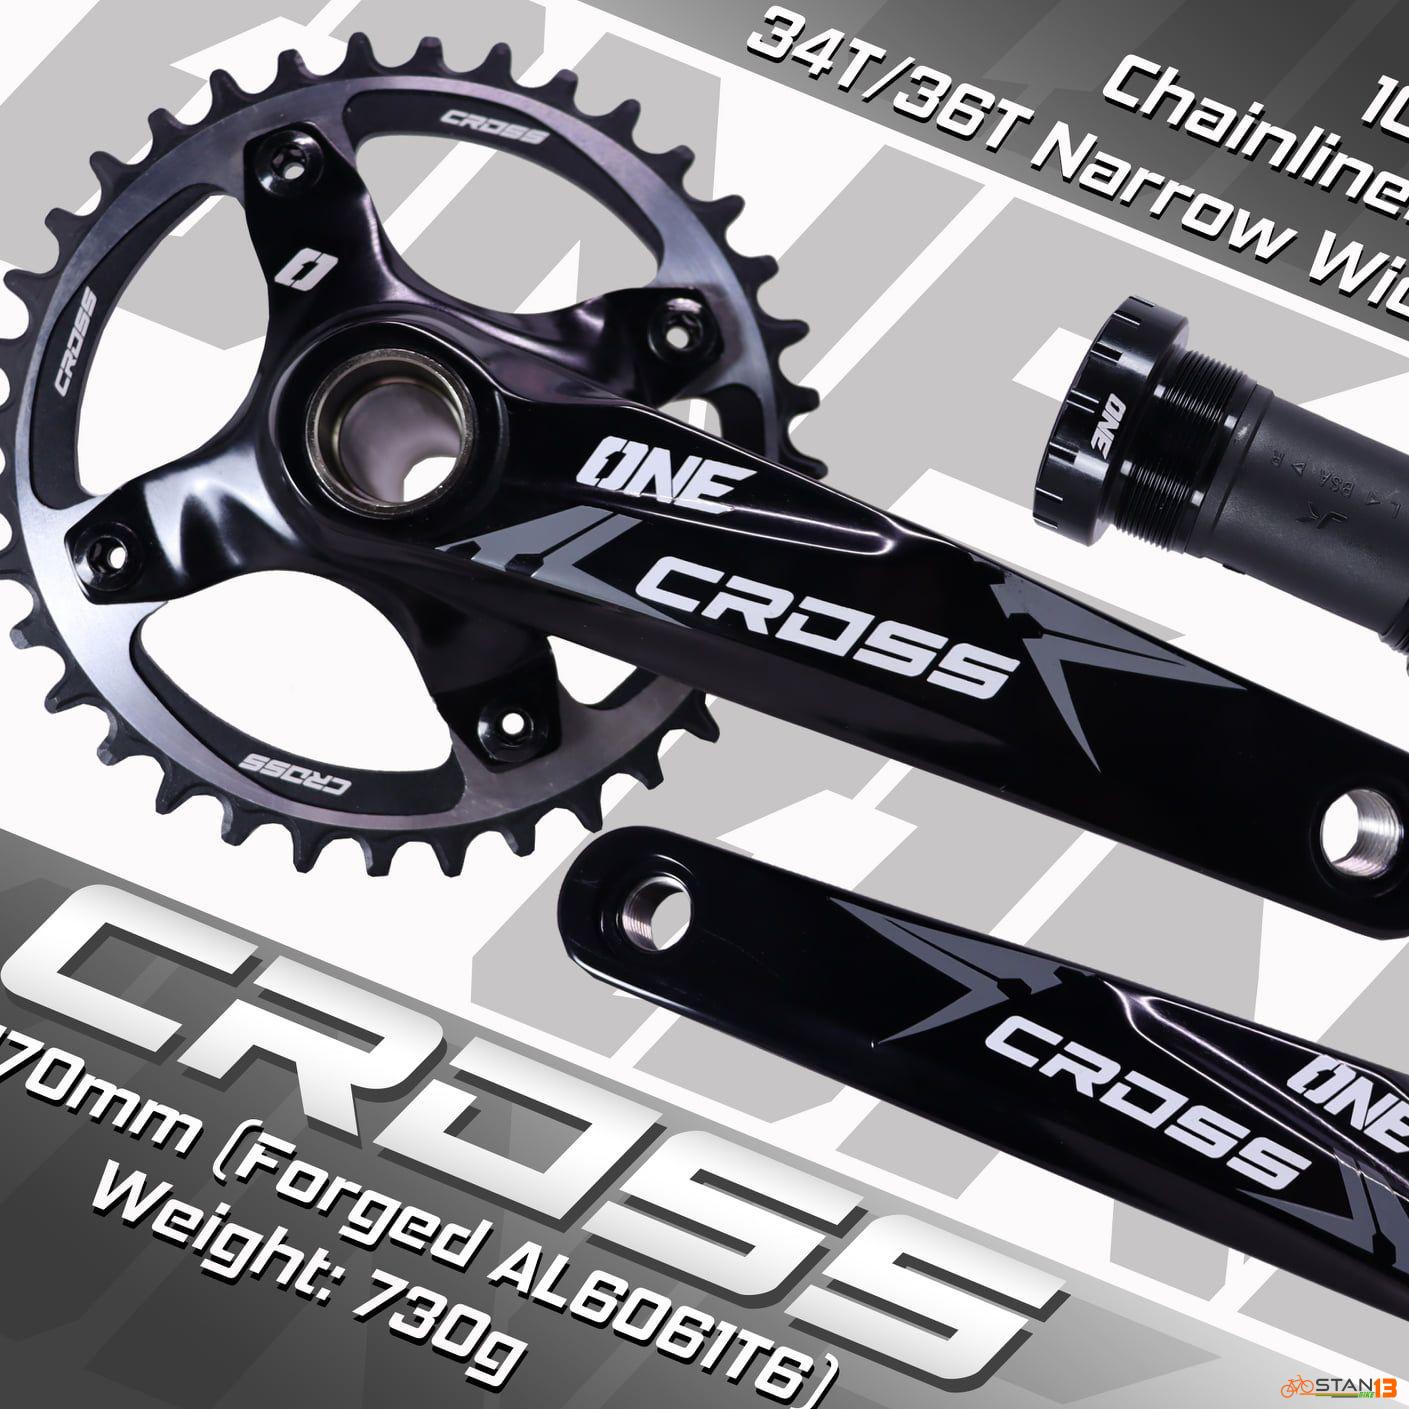 Crank ONE CROSS Crankset 1X Alloy Arm and ALLOY CHAINRING